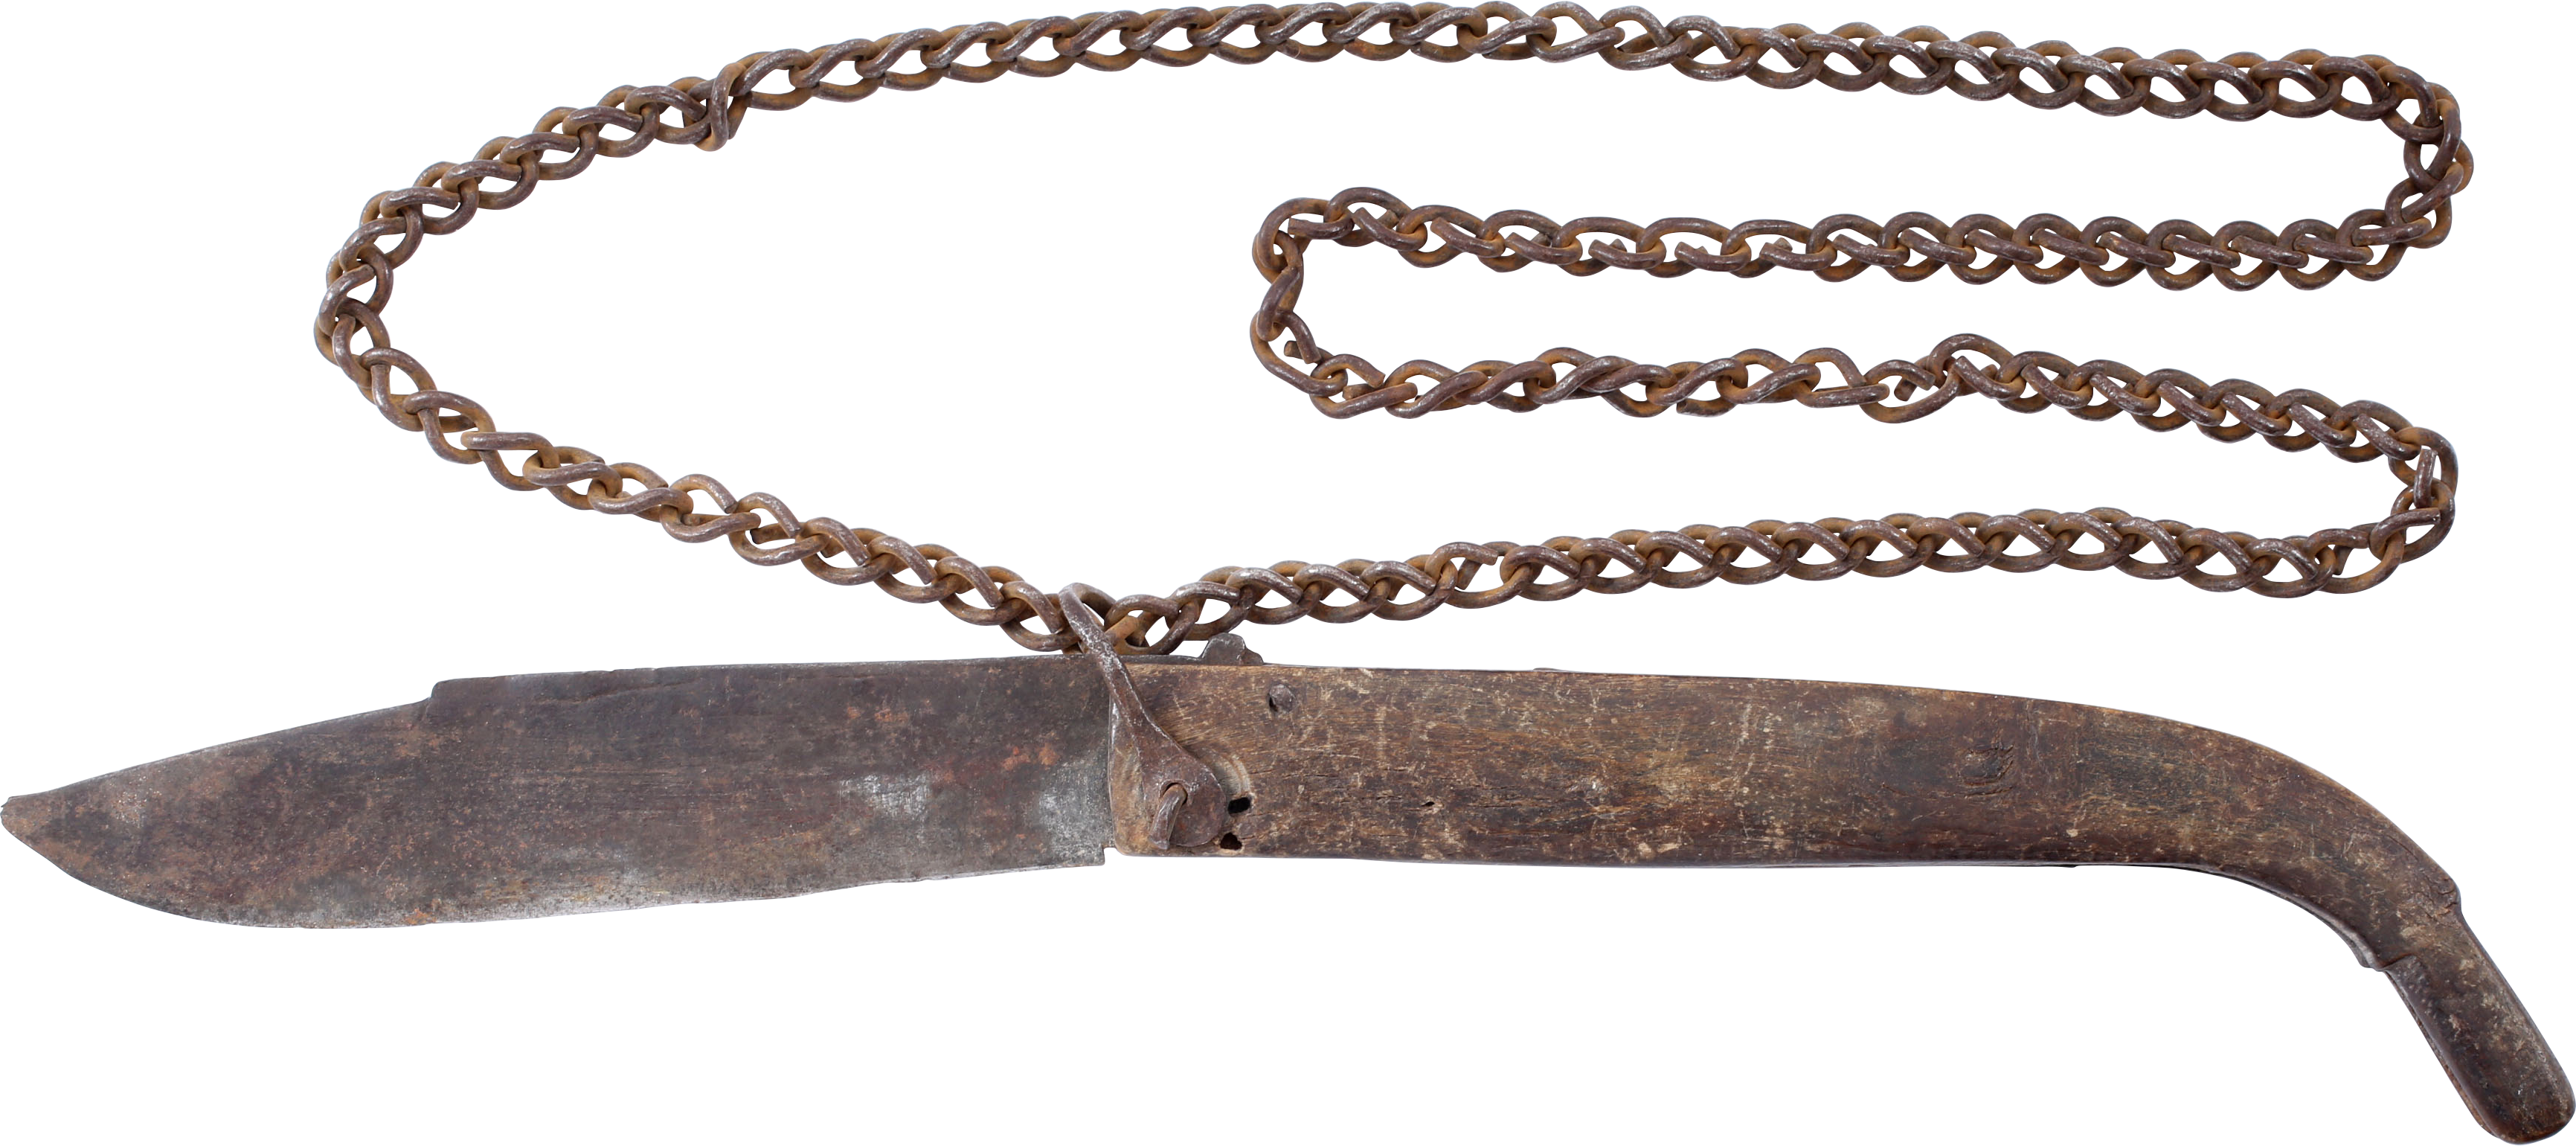 FANTASTIC PIRATE’S FIGHTING KNIFE, 17TH-EARLY 18TH CENTURY